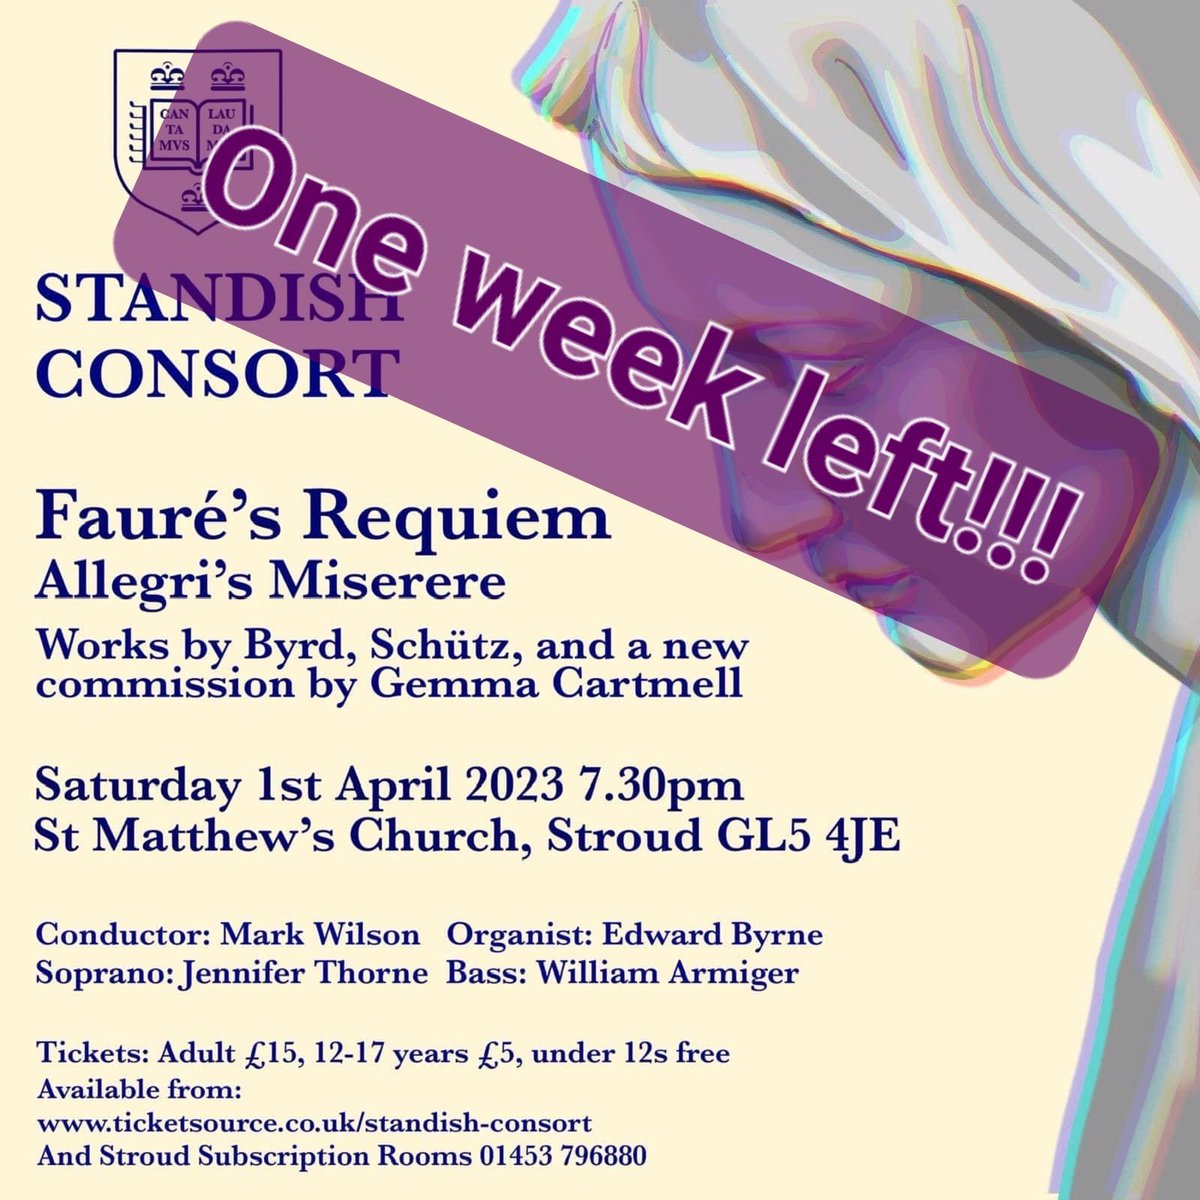 One more week until my choral piece will be performed by the amazing Standish Consort! You can still buy tickets on the Web link. I'm so excited!! 
#composer #choral #choir #sacredmusic